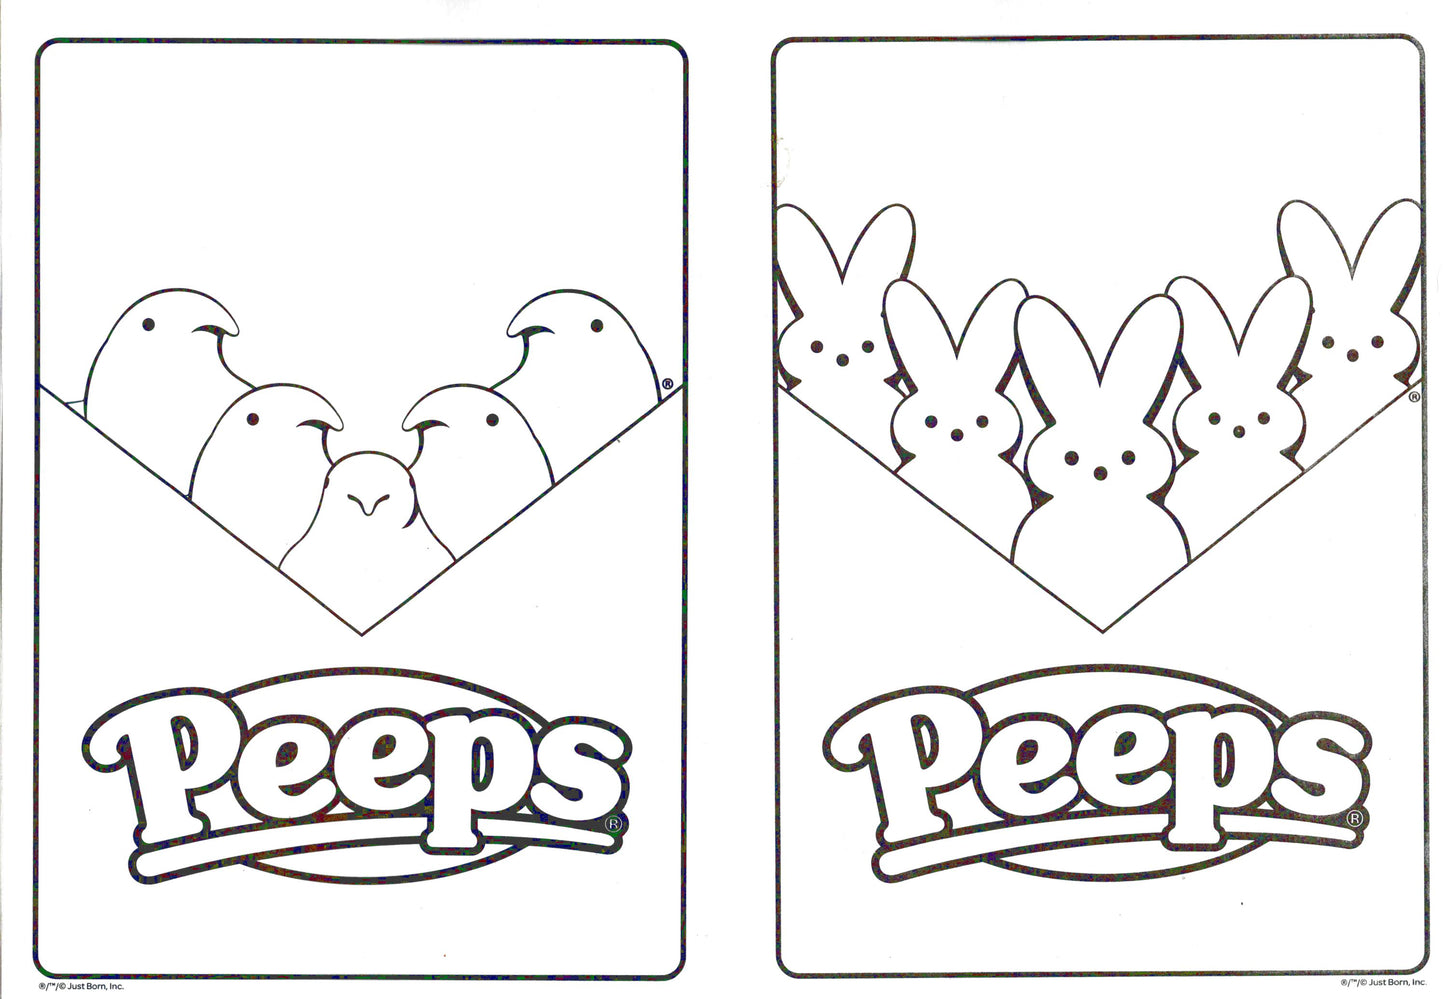 Peeps - Bonus Easter egg stands on the back - Jumbo Coloring & Activity Book (Set of 2 Books)